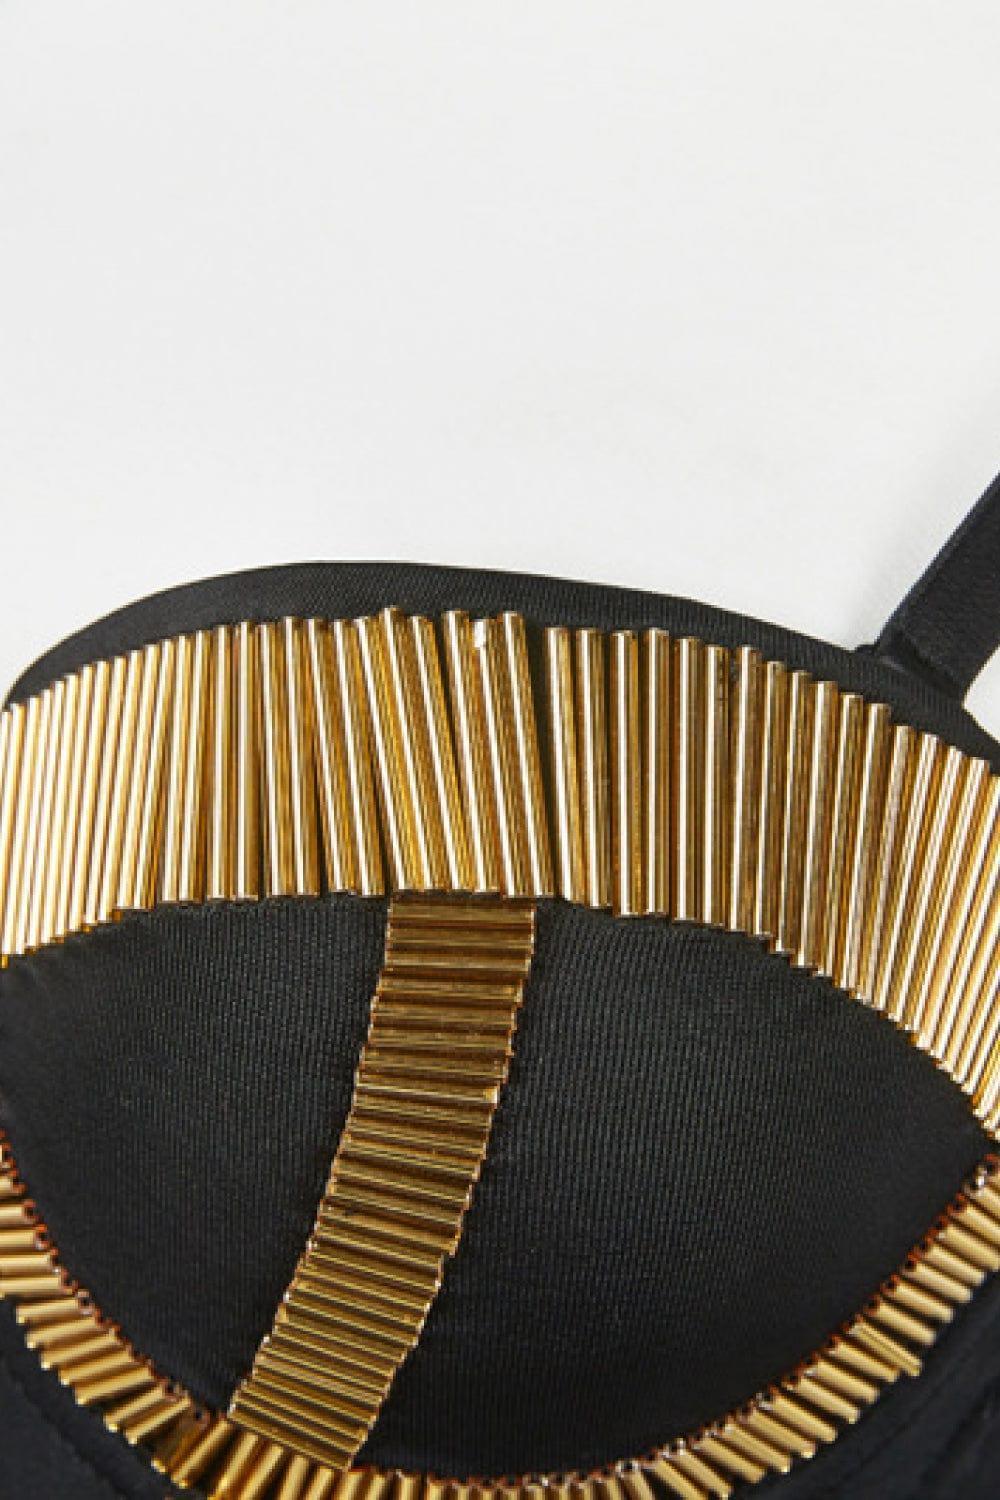 Bugle Bead Trim Bustier | Black/Gold - Statement Piece NY _tab_final-sale, _tab_size-chart, Bandage Top, black top, bust, bustier, corset, Crop Top, Crop Tops, cute crop top, cute summer crop top, cute top, Cute Tops, gold bustier, gold top, sexy top, statement, Statement Clothing, statement piece, Statement Piece Boutique, statement piece ny, Statement Pieces, Statement Pieces Boutique, statement top, statement tops, top, tops 